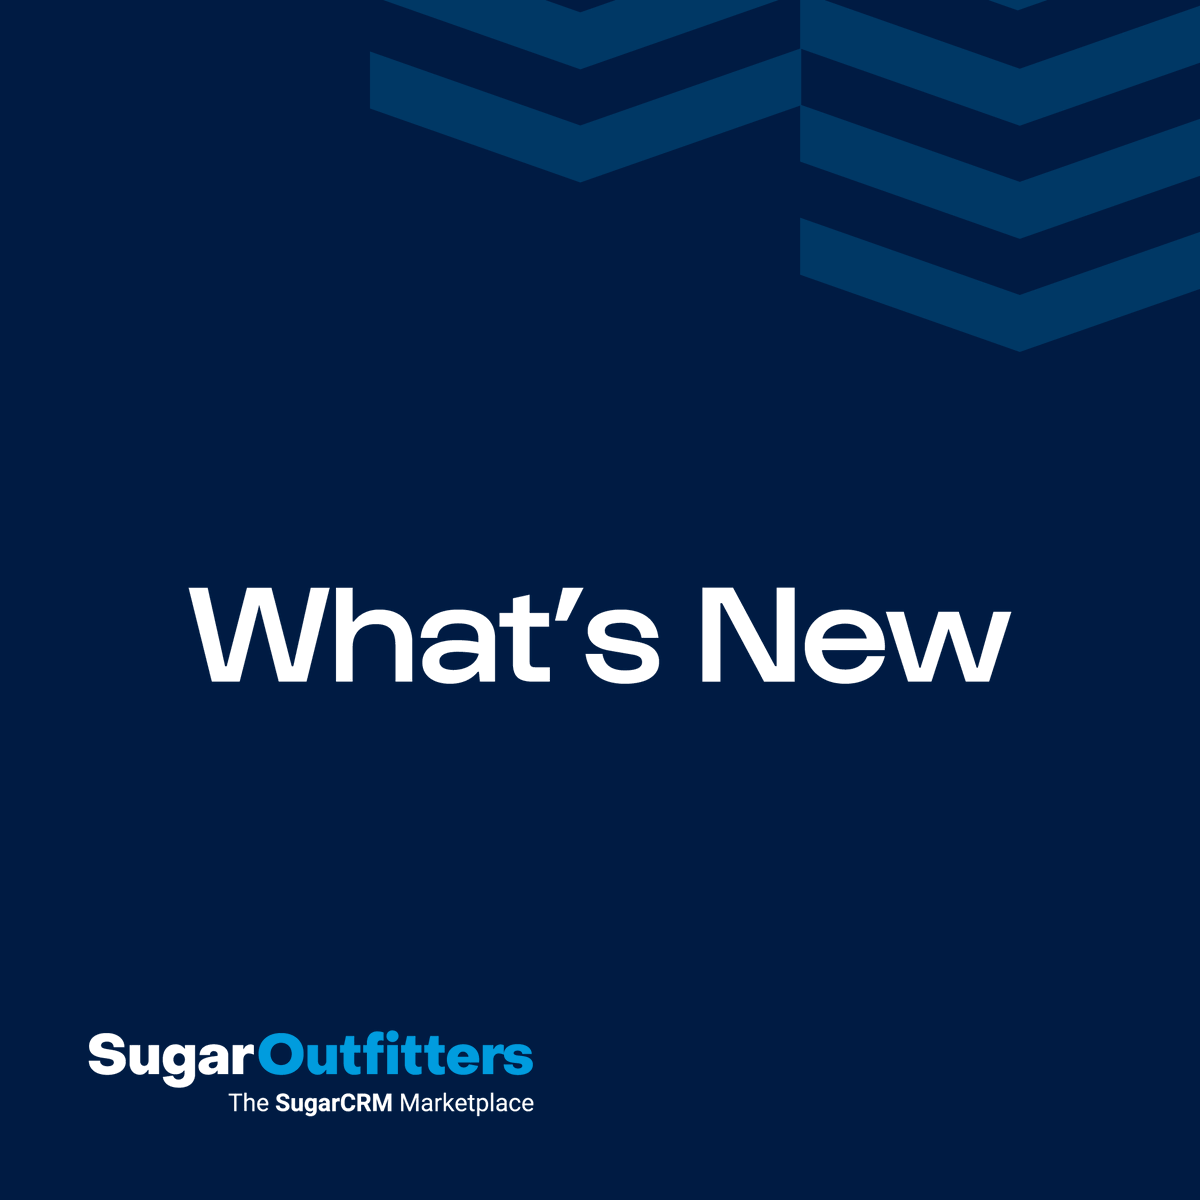 Glances is a new, no-code integration platform that makes Sugar and other apps work in harmony. 🤝 Learn how to add Glances as a dashlet in Sugar—it only takes a minute! sgrcrm.co/4dw0Pun #CRM